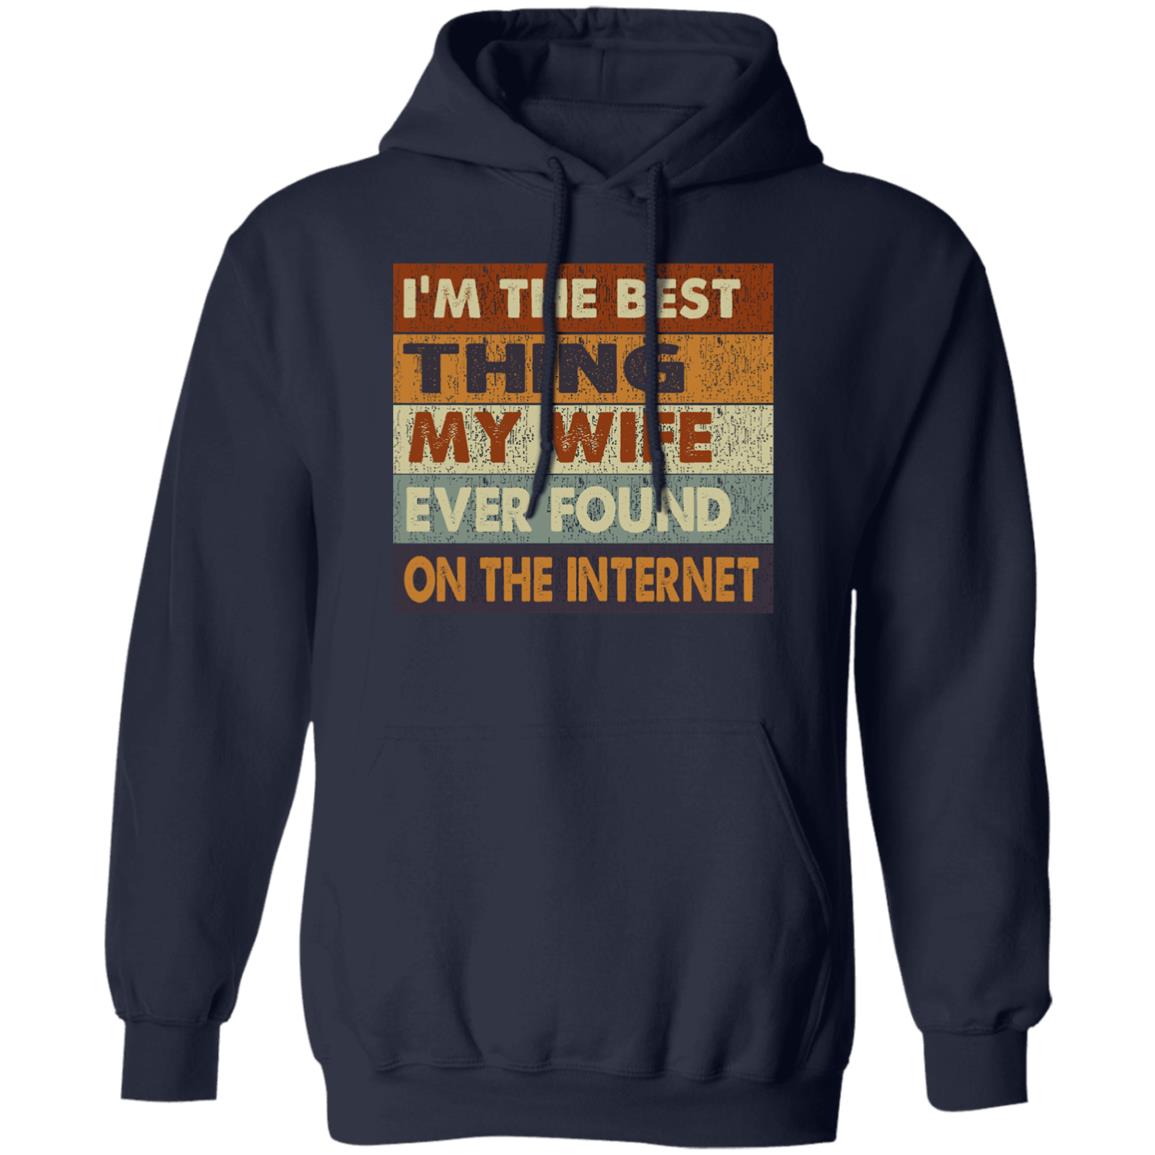 I'm the best thing my wife ever found on the internet hoodie